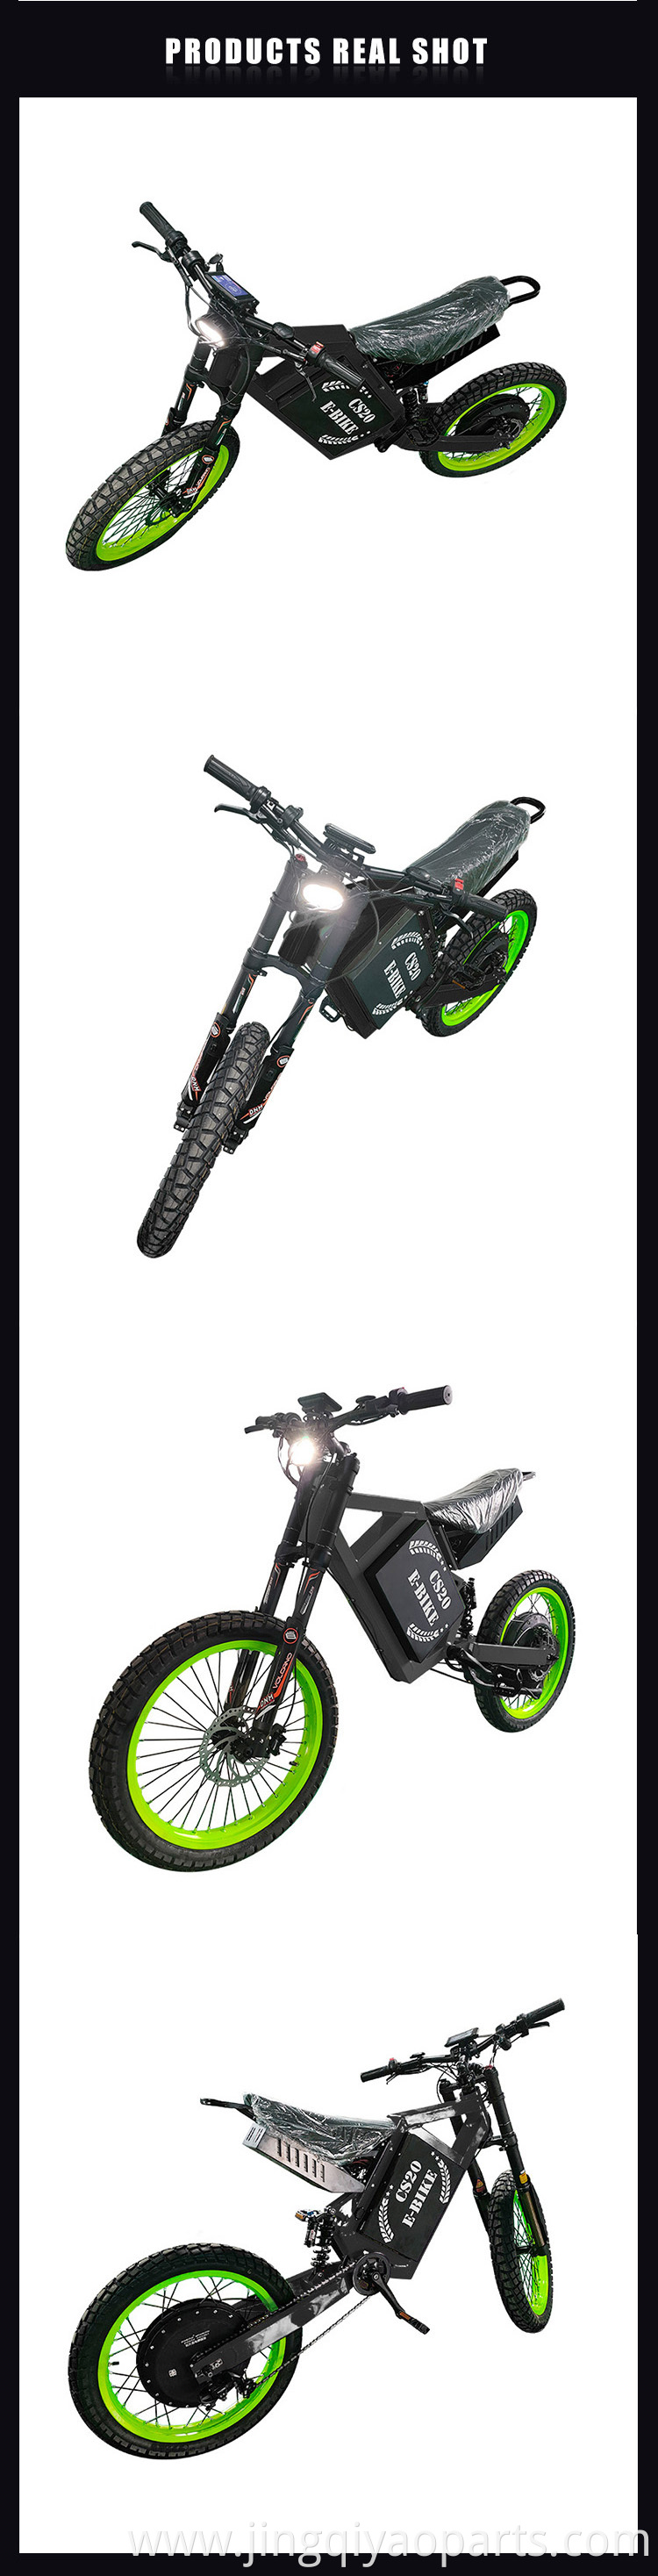 CS20 ebike off-road electric motorcycle